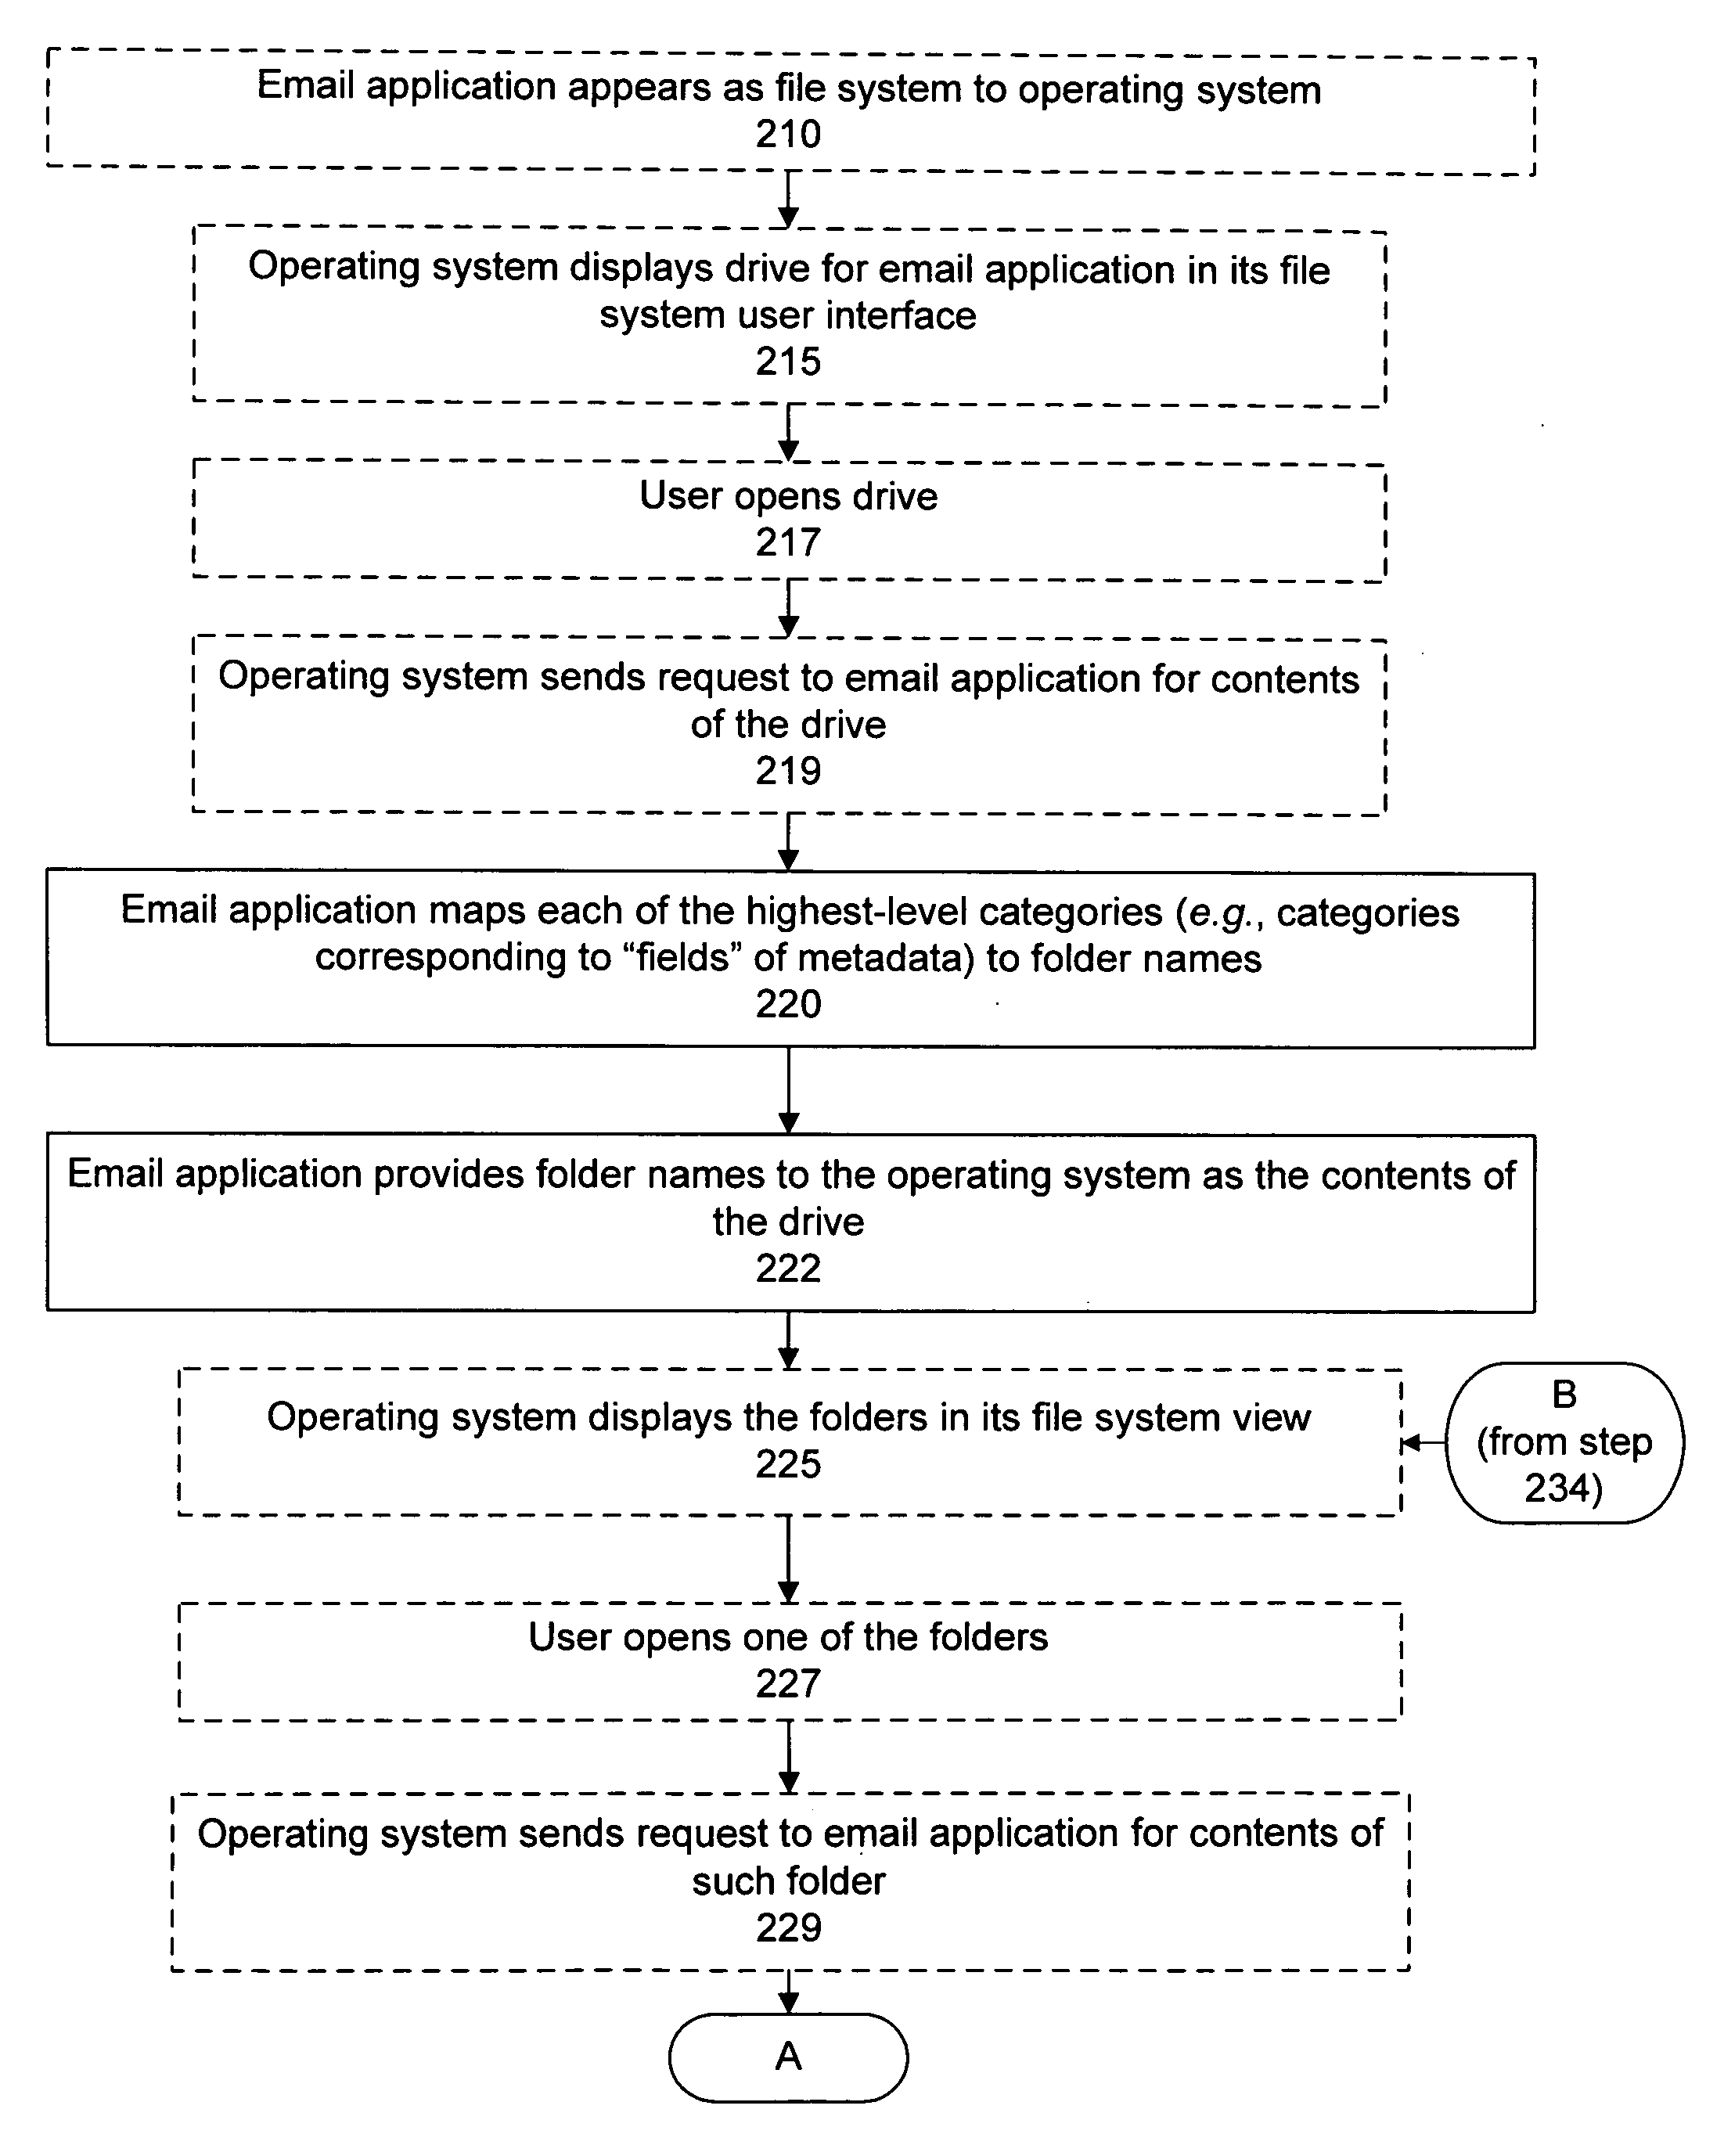 System and method for enabling an external-system view of email attachments